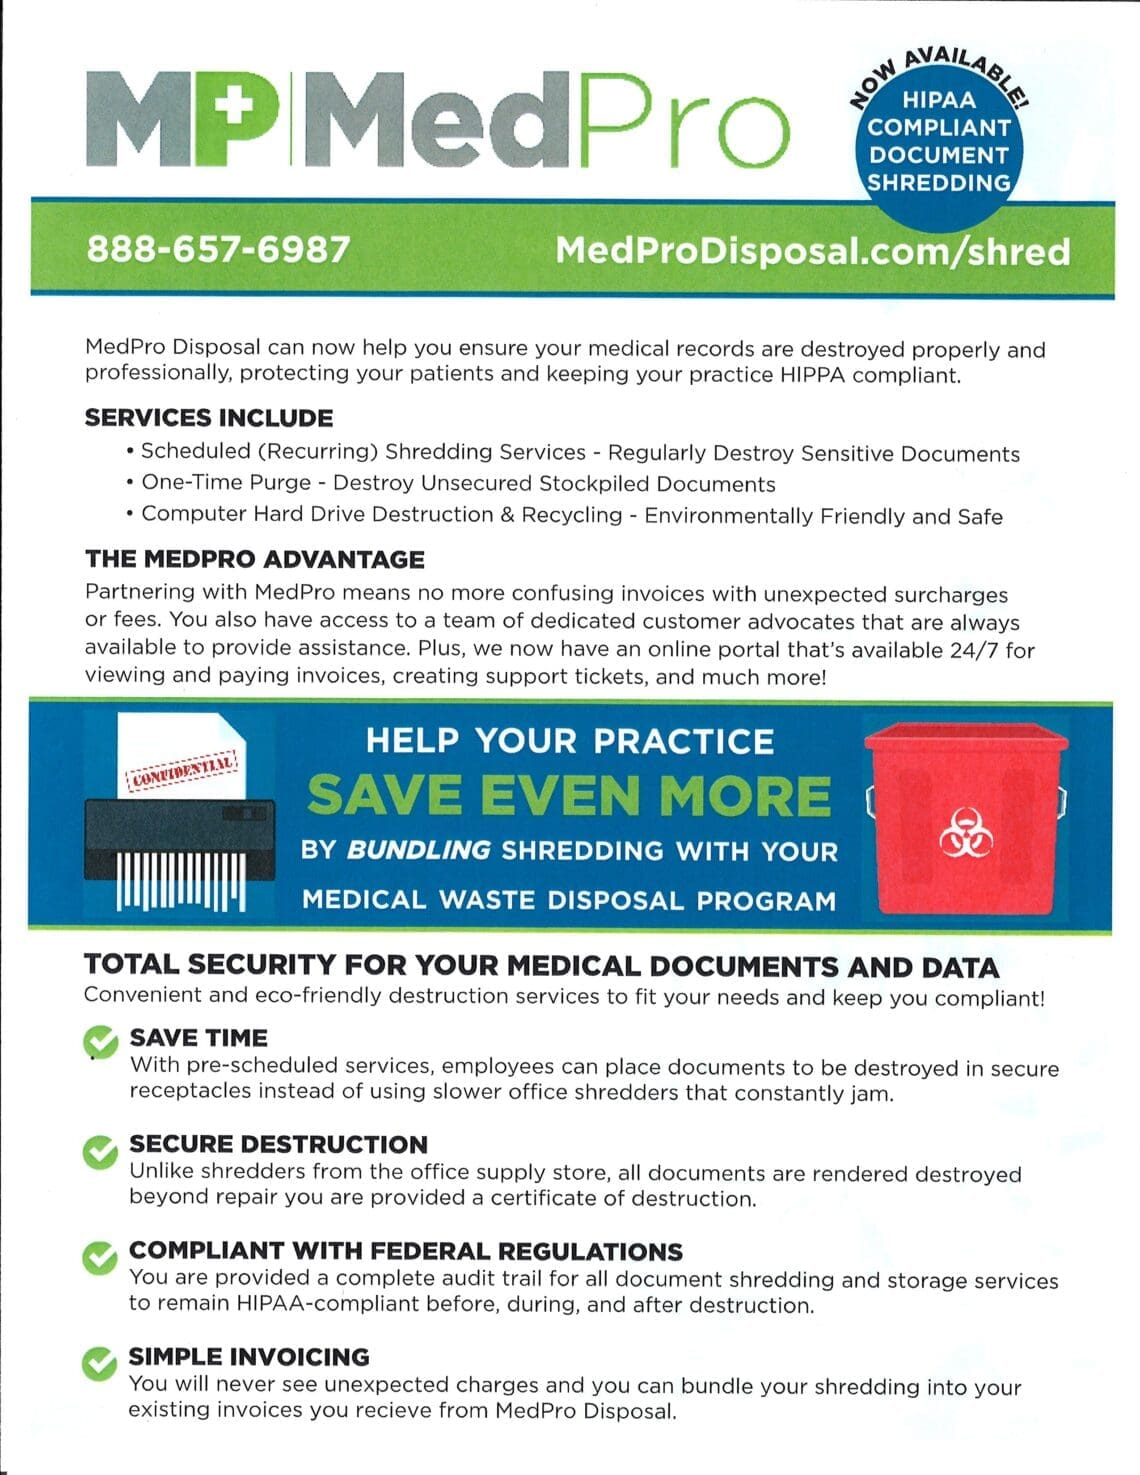 MedPro Waste Disposal and Shredding